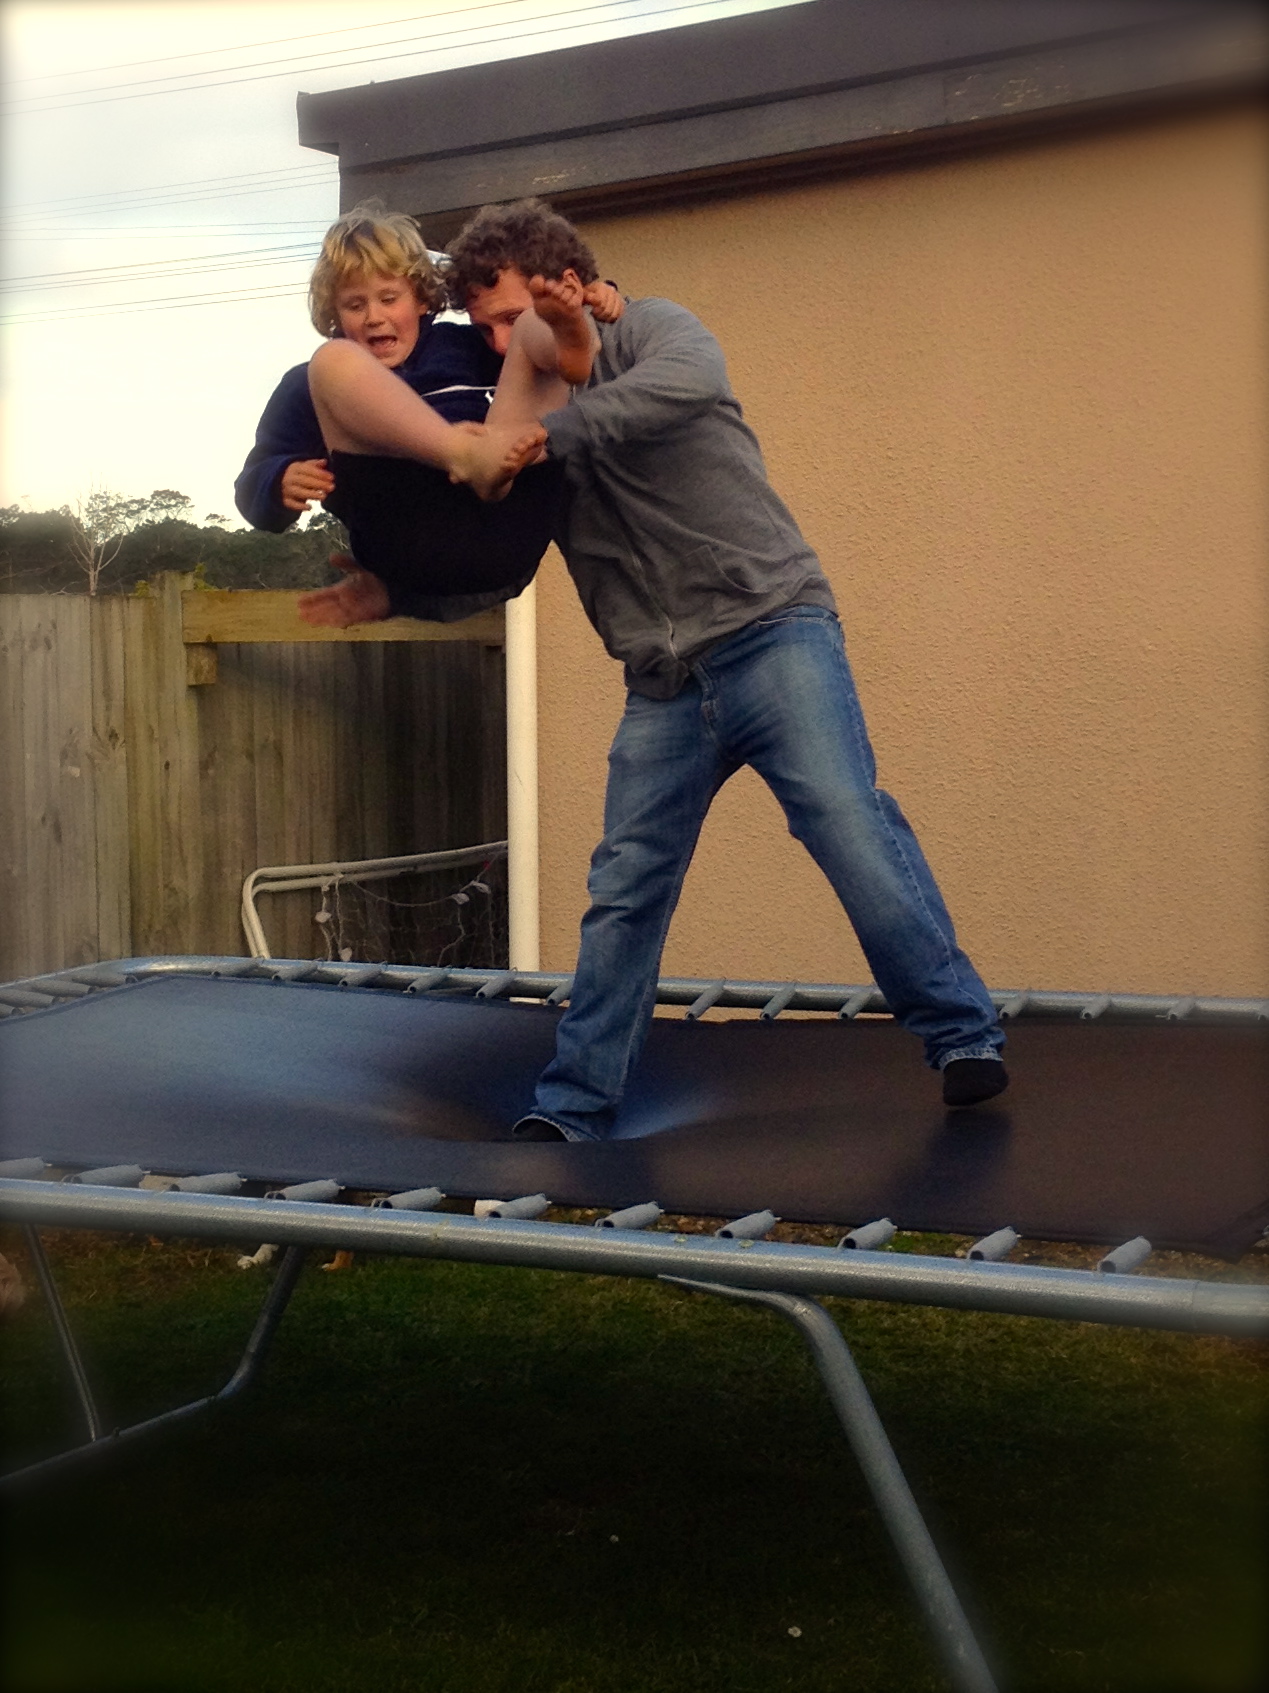 Playing on the tramp